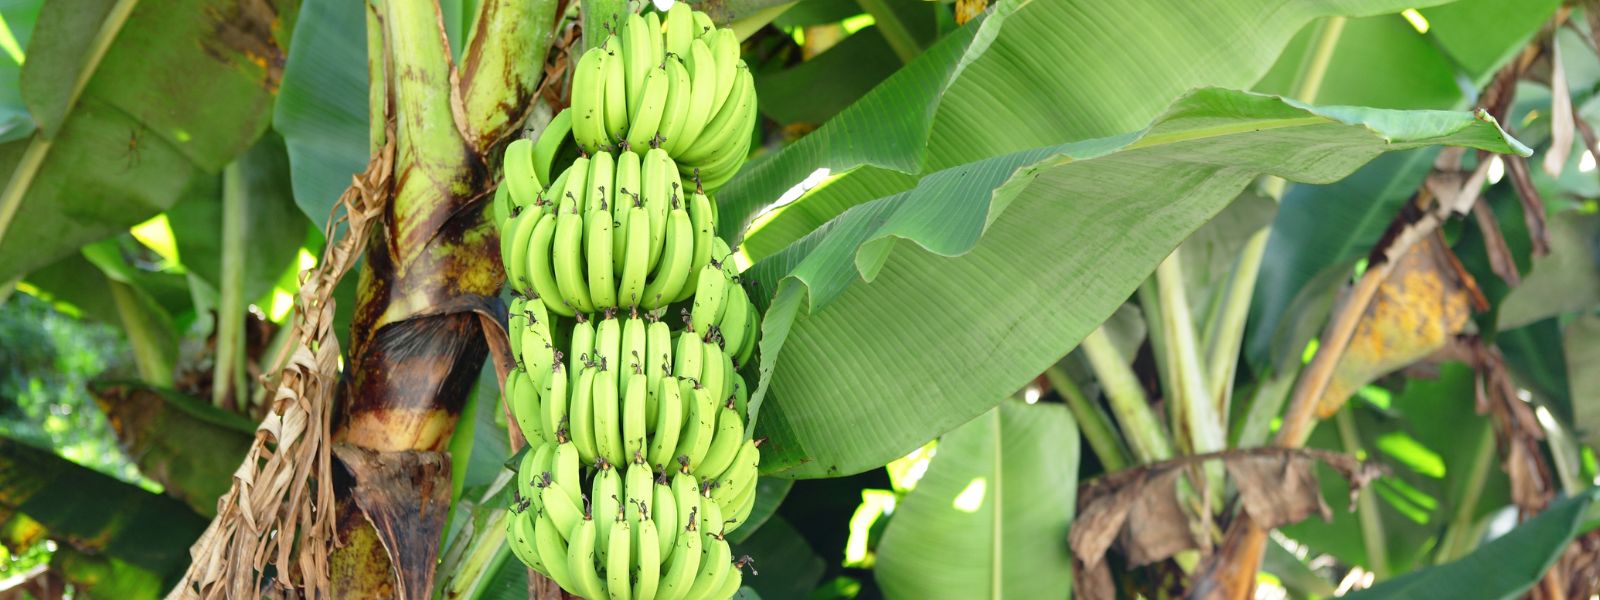 banana plants with fruit ready to harvest, wide landscape banner image